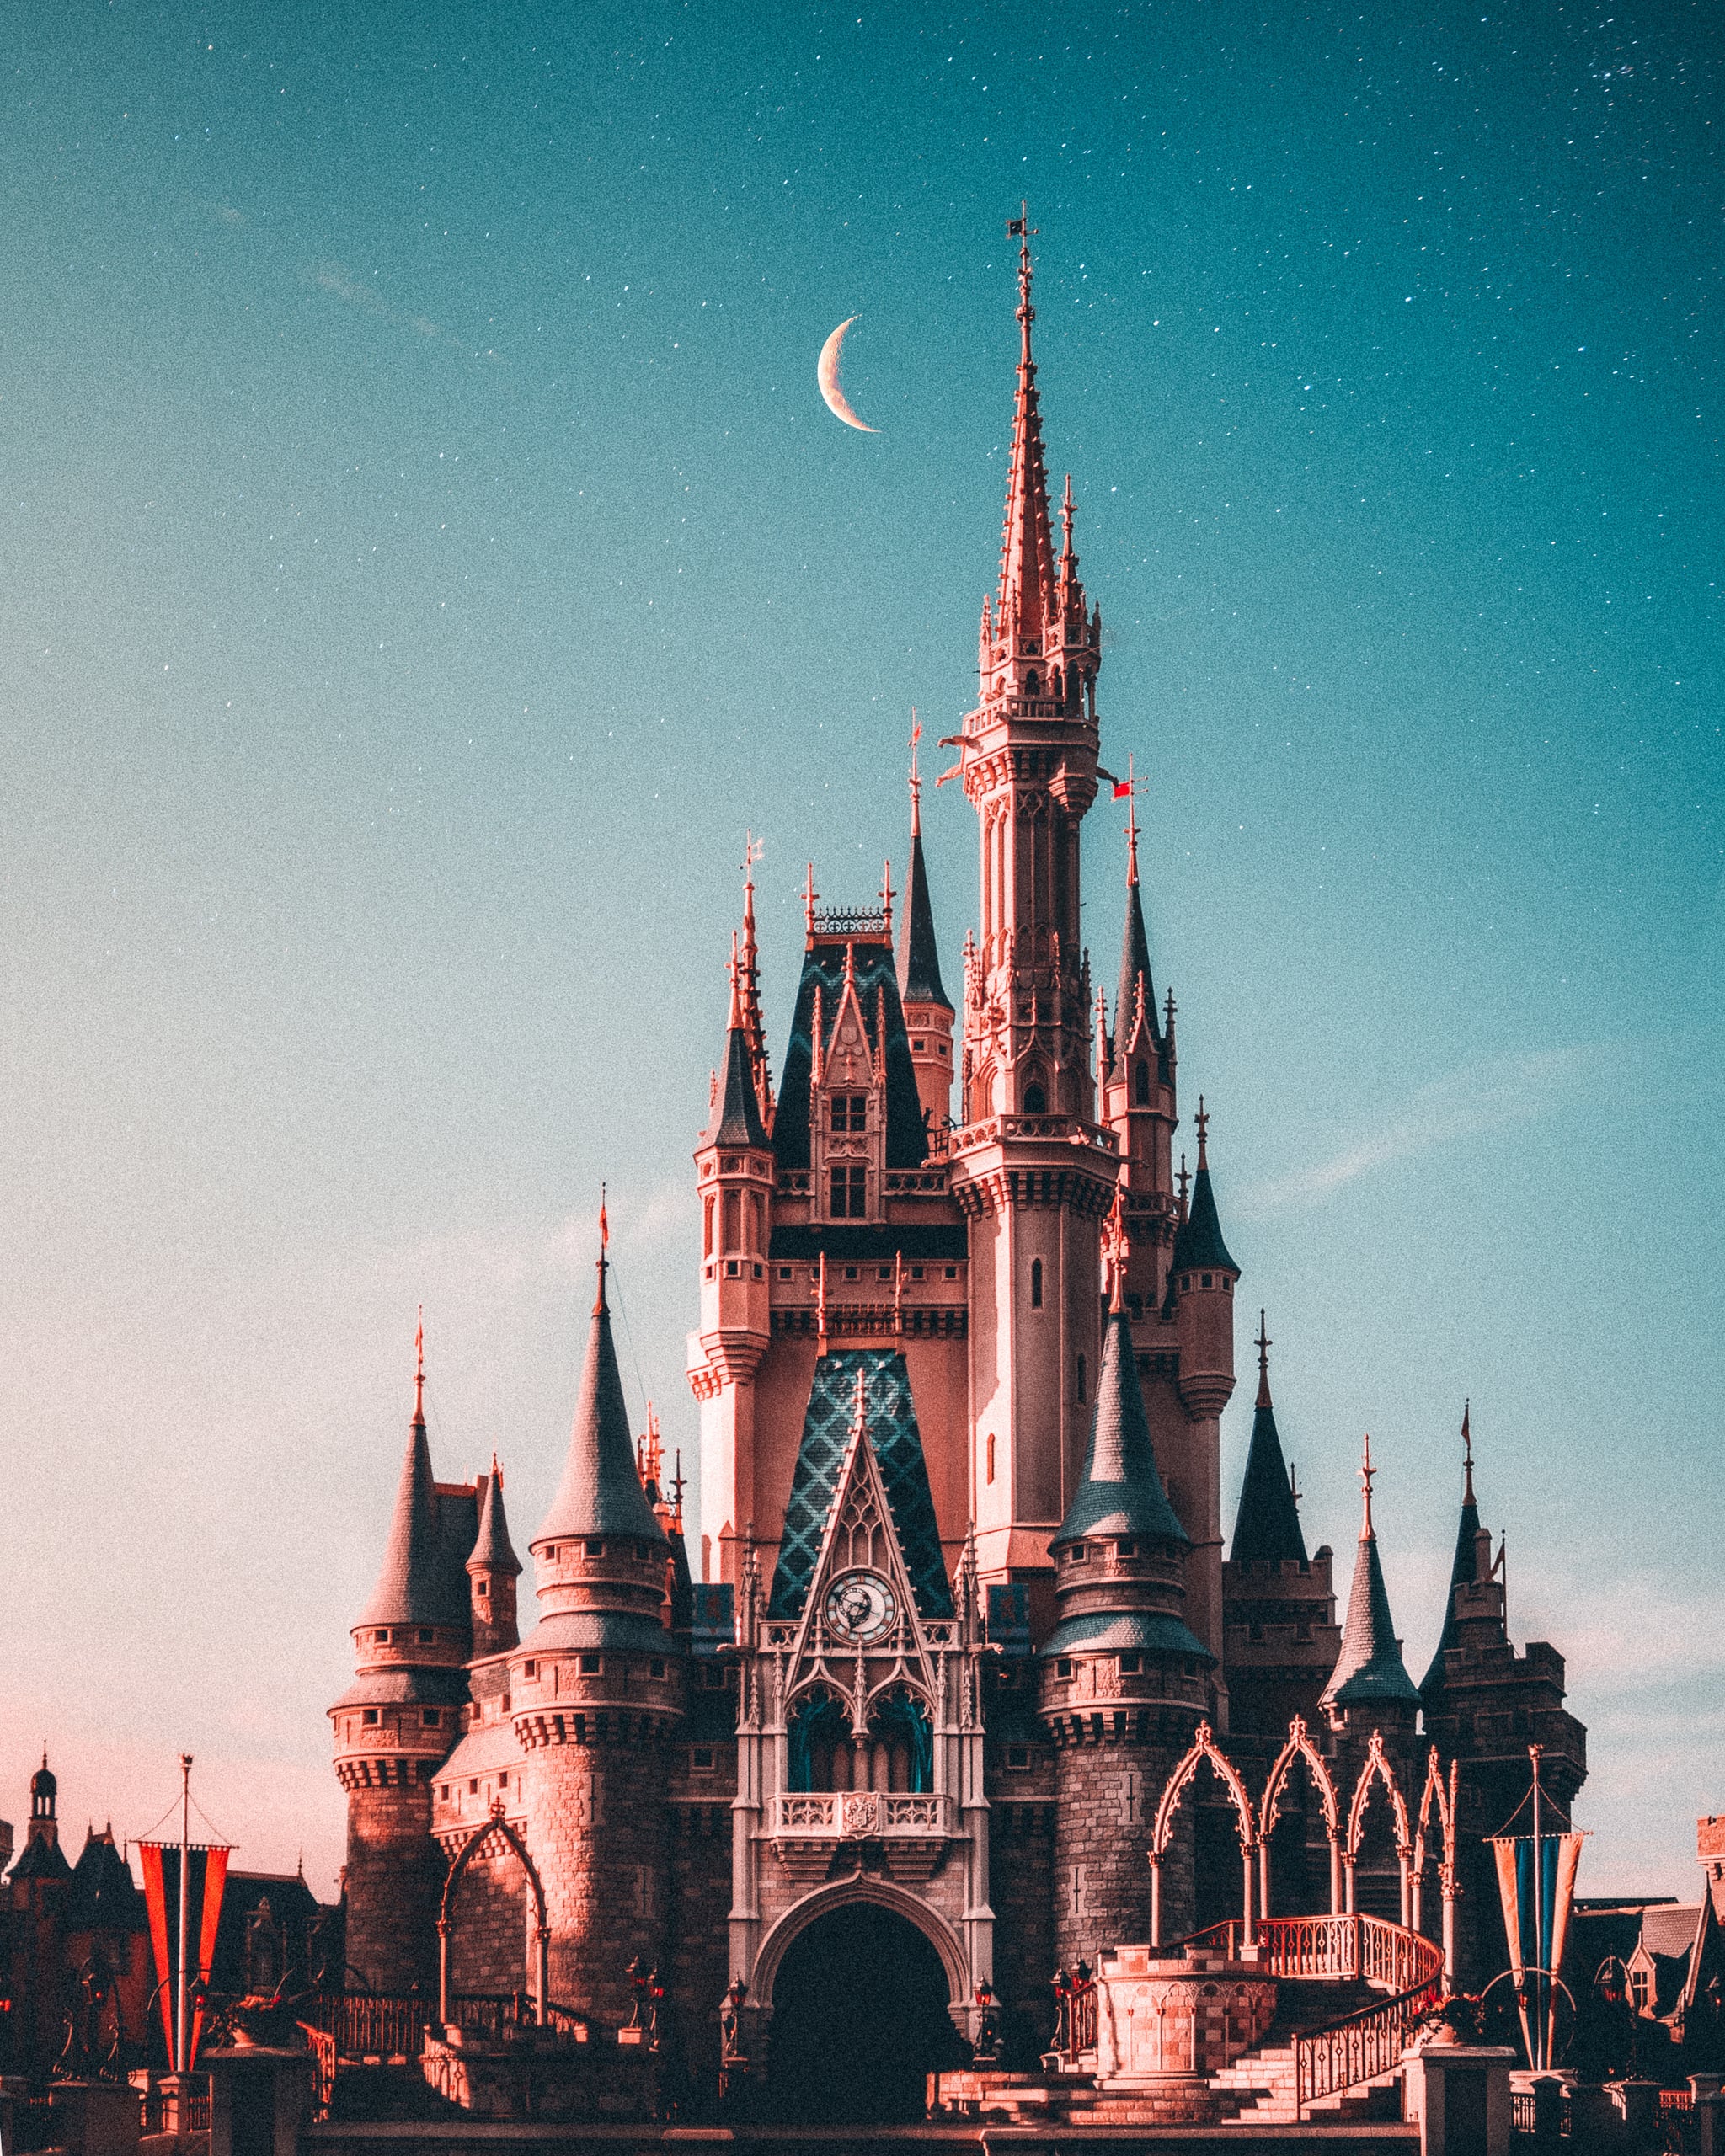 Disney iphone wallpaper the best ios wallpaper ideas thatll make your phone look aesthetically pleasing af tech photo